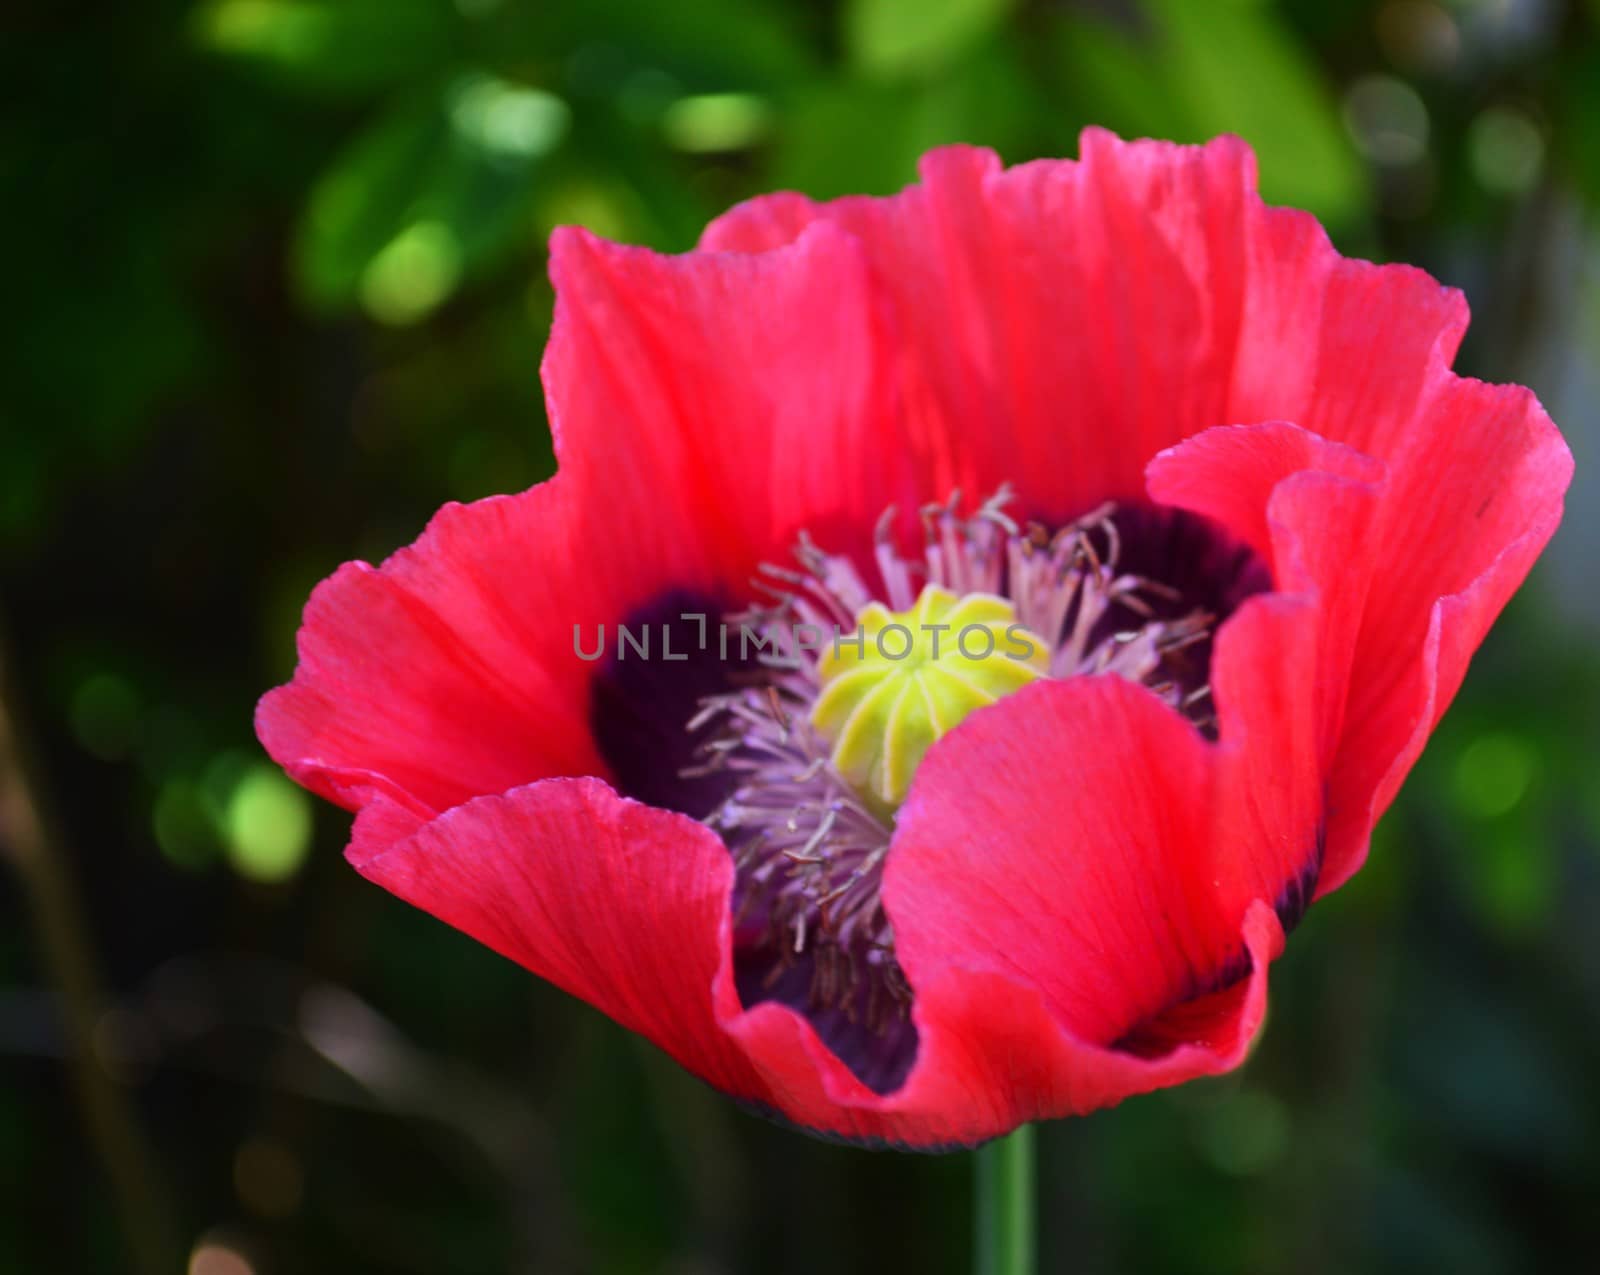 A close-up image of the Opium poppy flower.